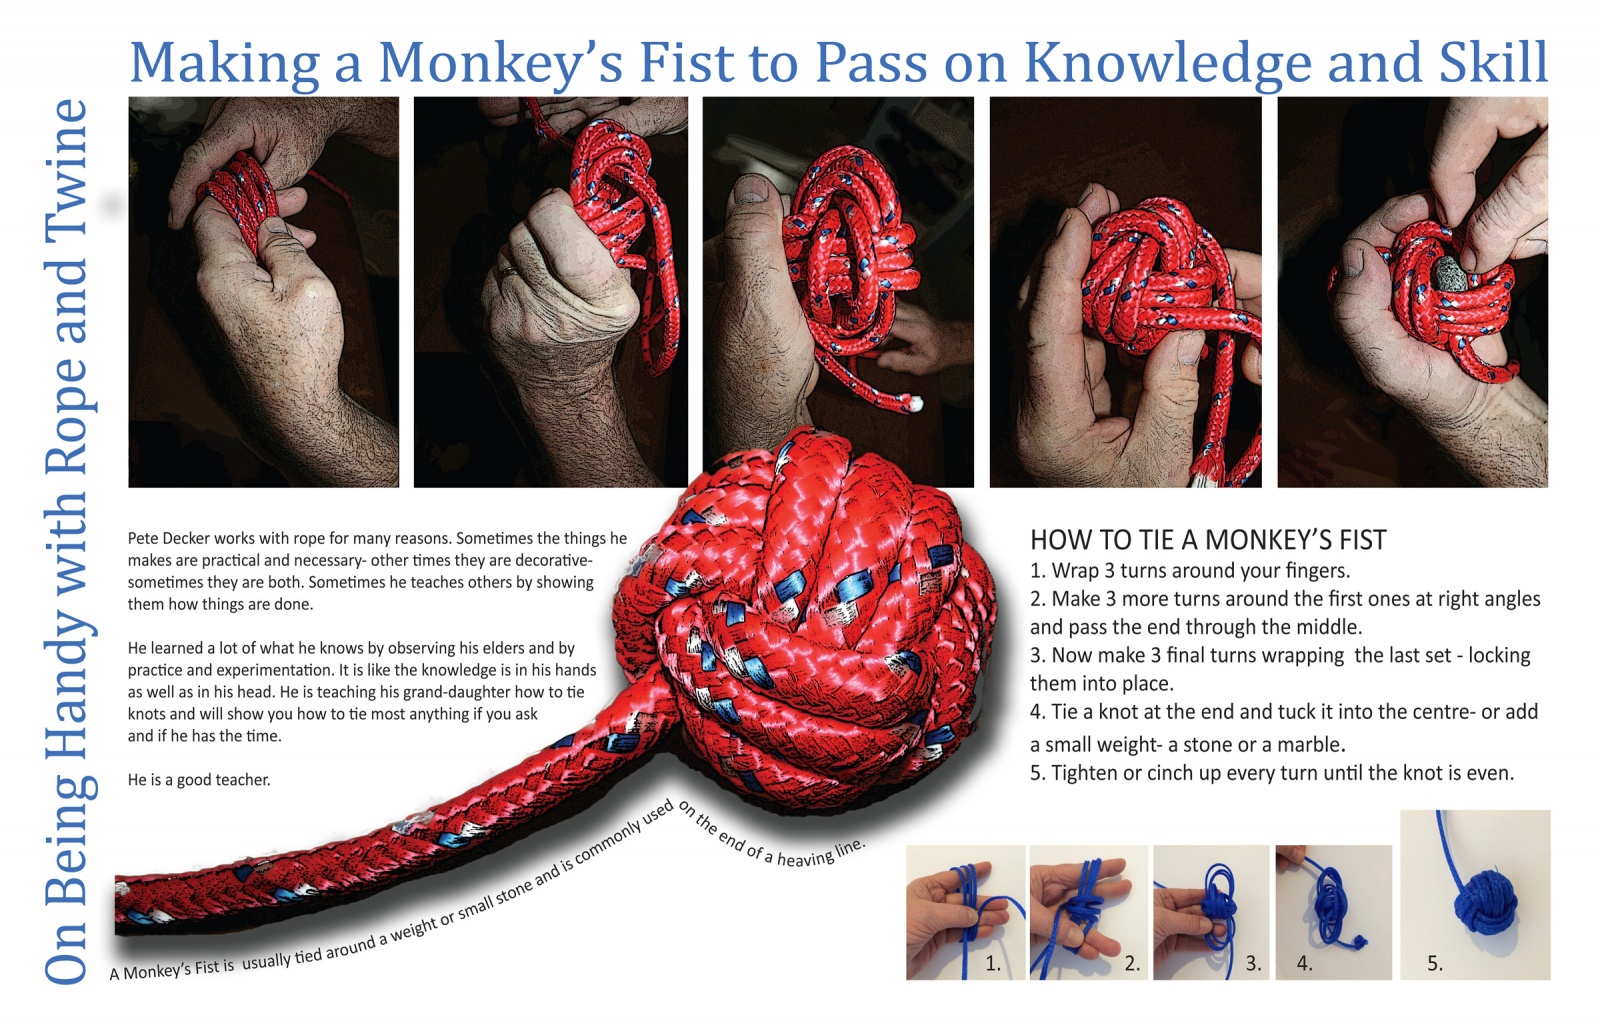 Making a Monkey’s Fist to Pass on Knowledge and Skill